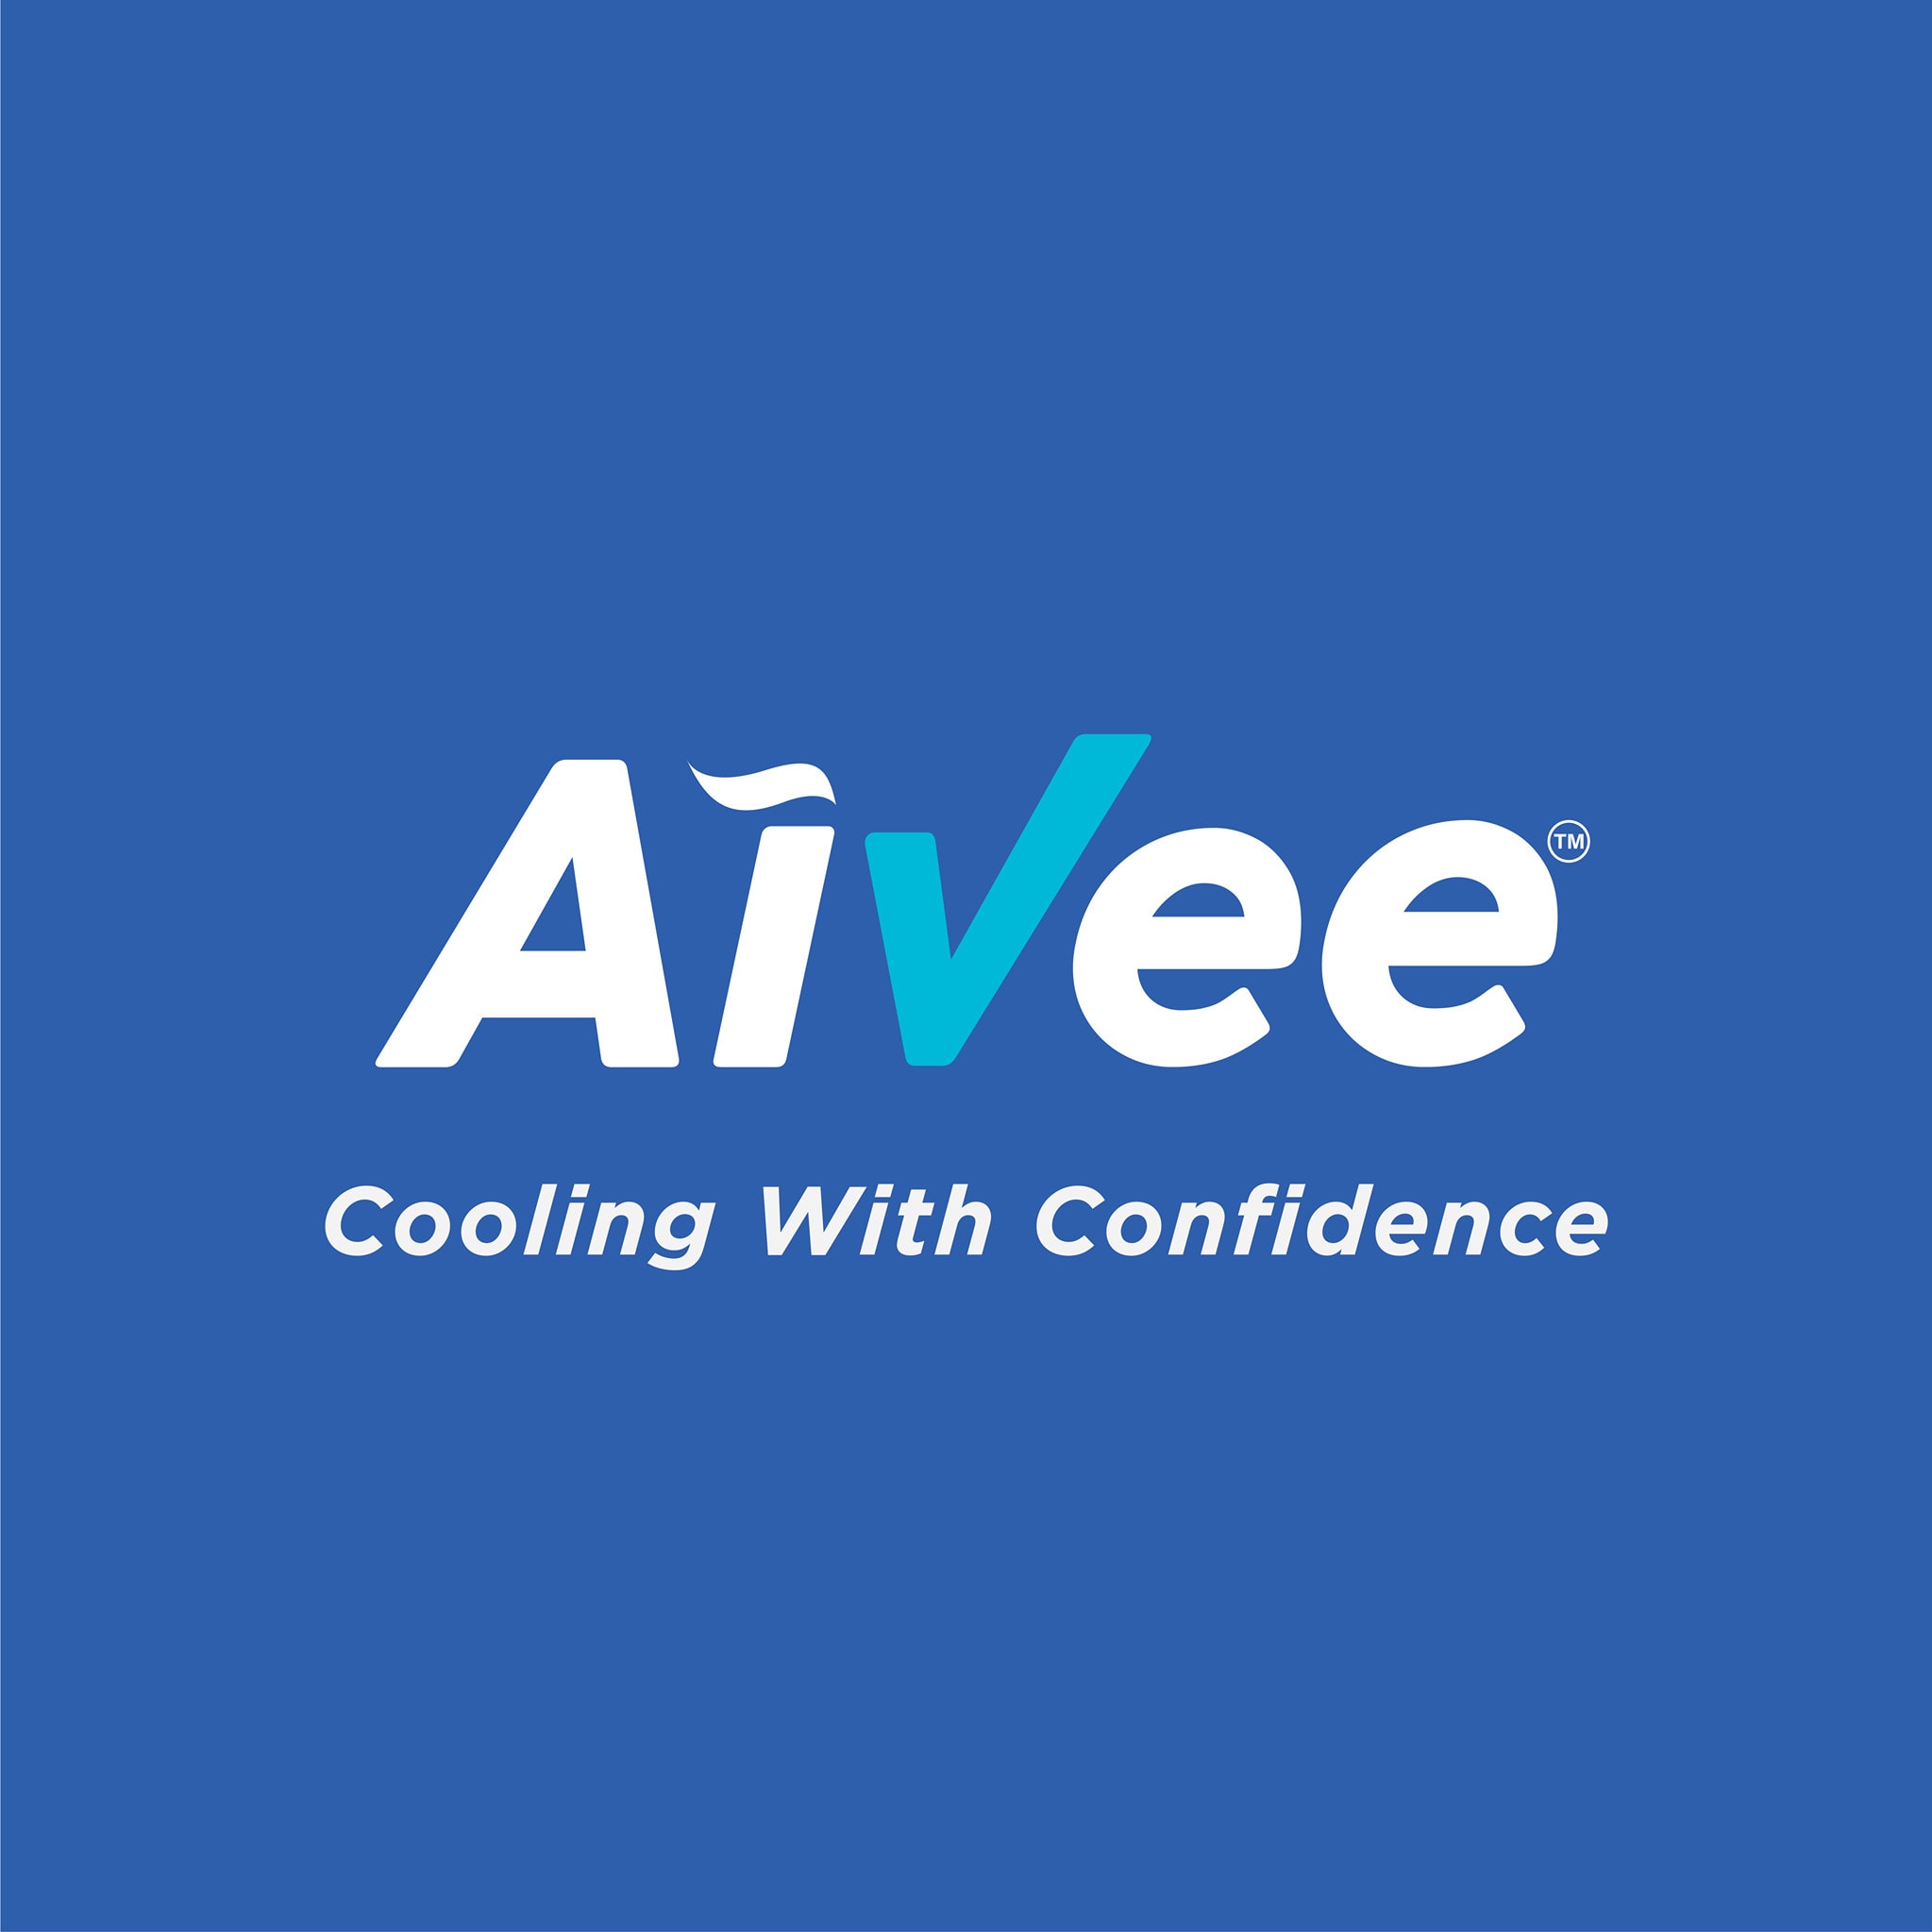 Aivee Cooling Confidents